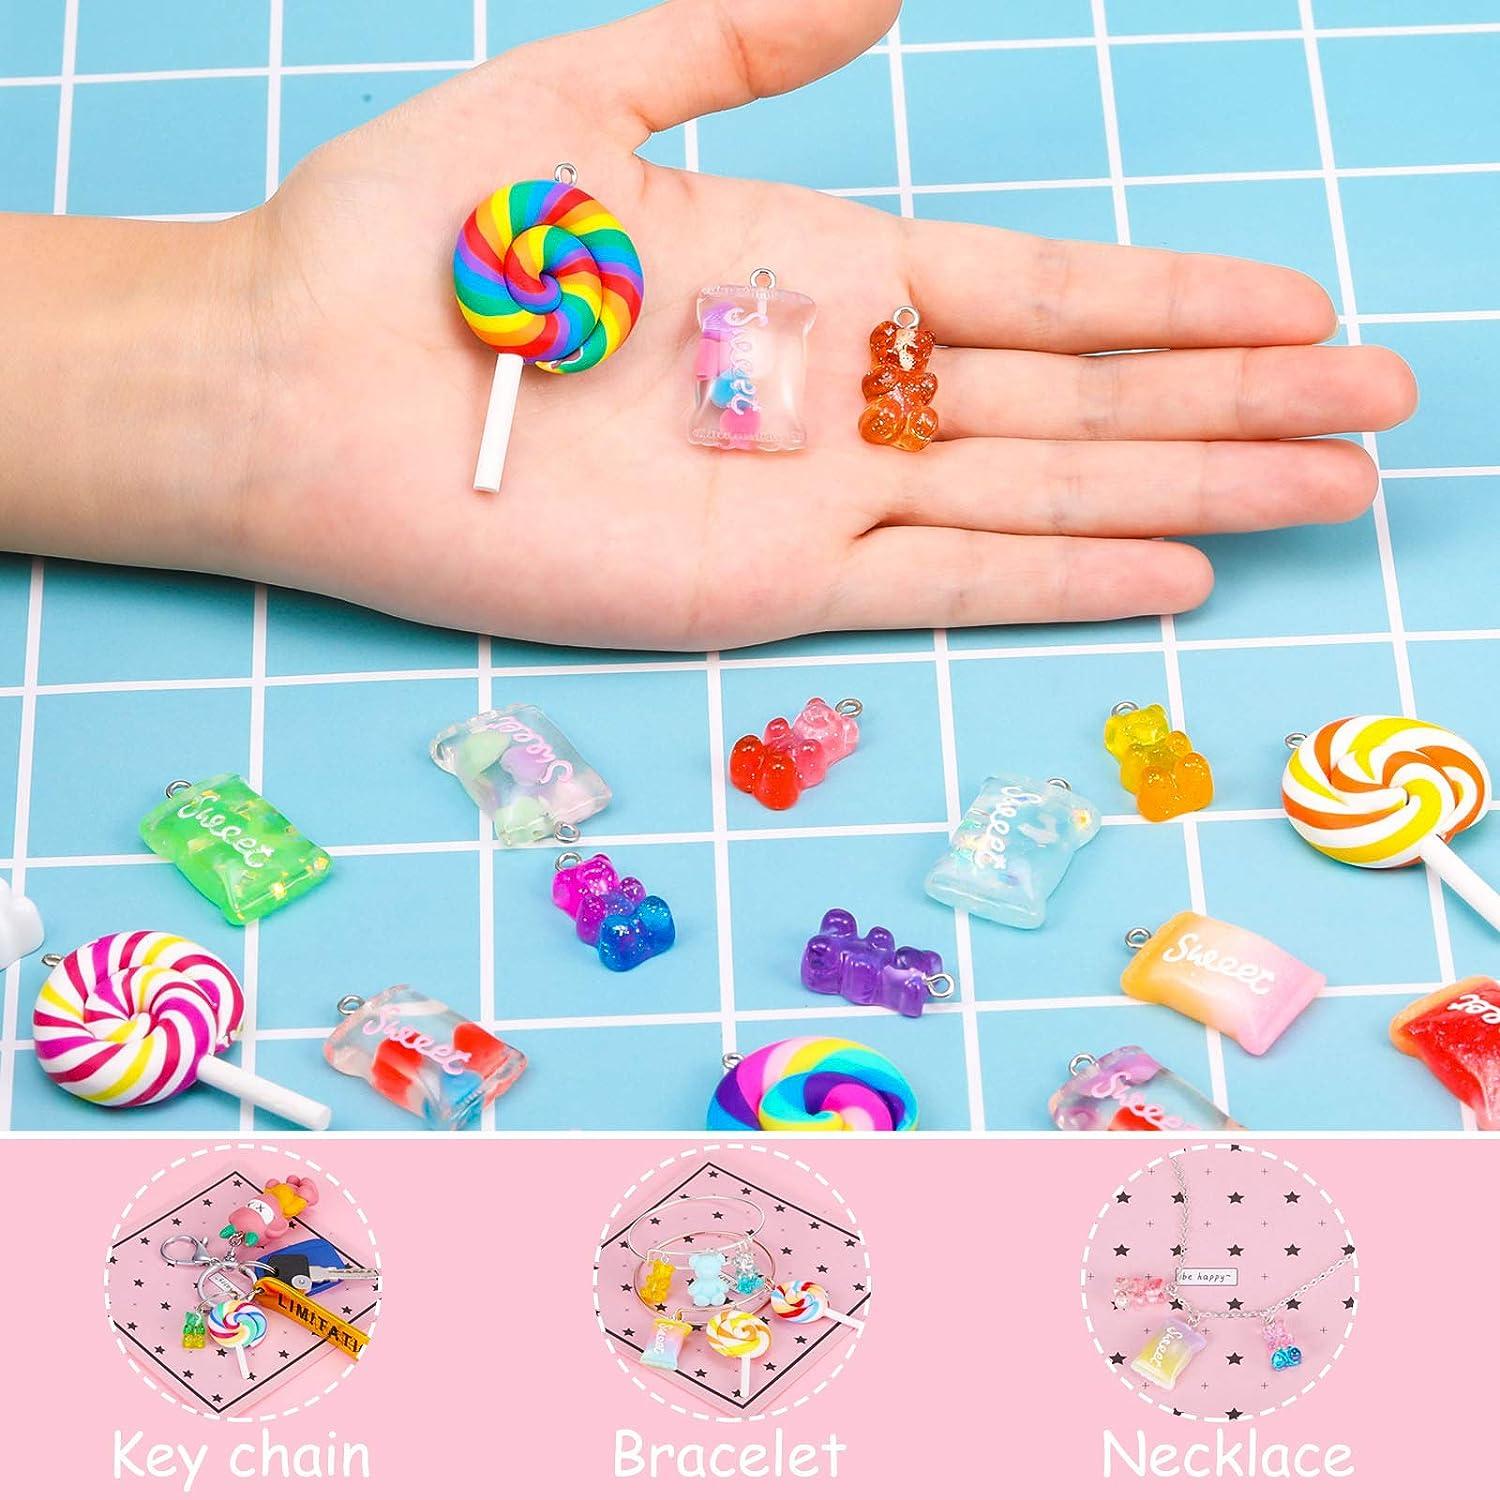 10PCS Candy Resin Charms For Jewelry Making Cute Kawaii Food Fruit  Chocolate Charm Women Earring Resin Pendant - Price history & Review, AliExpress Seller - OurGenarationJewelry Store